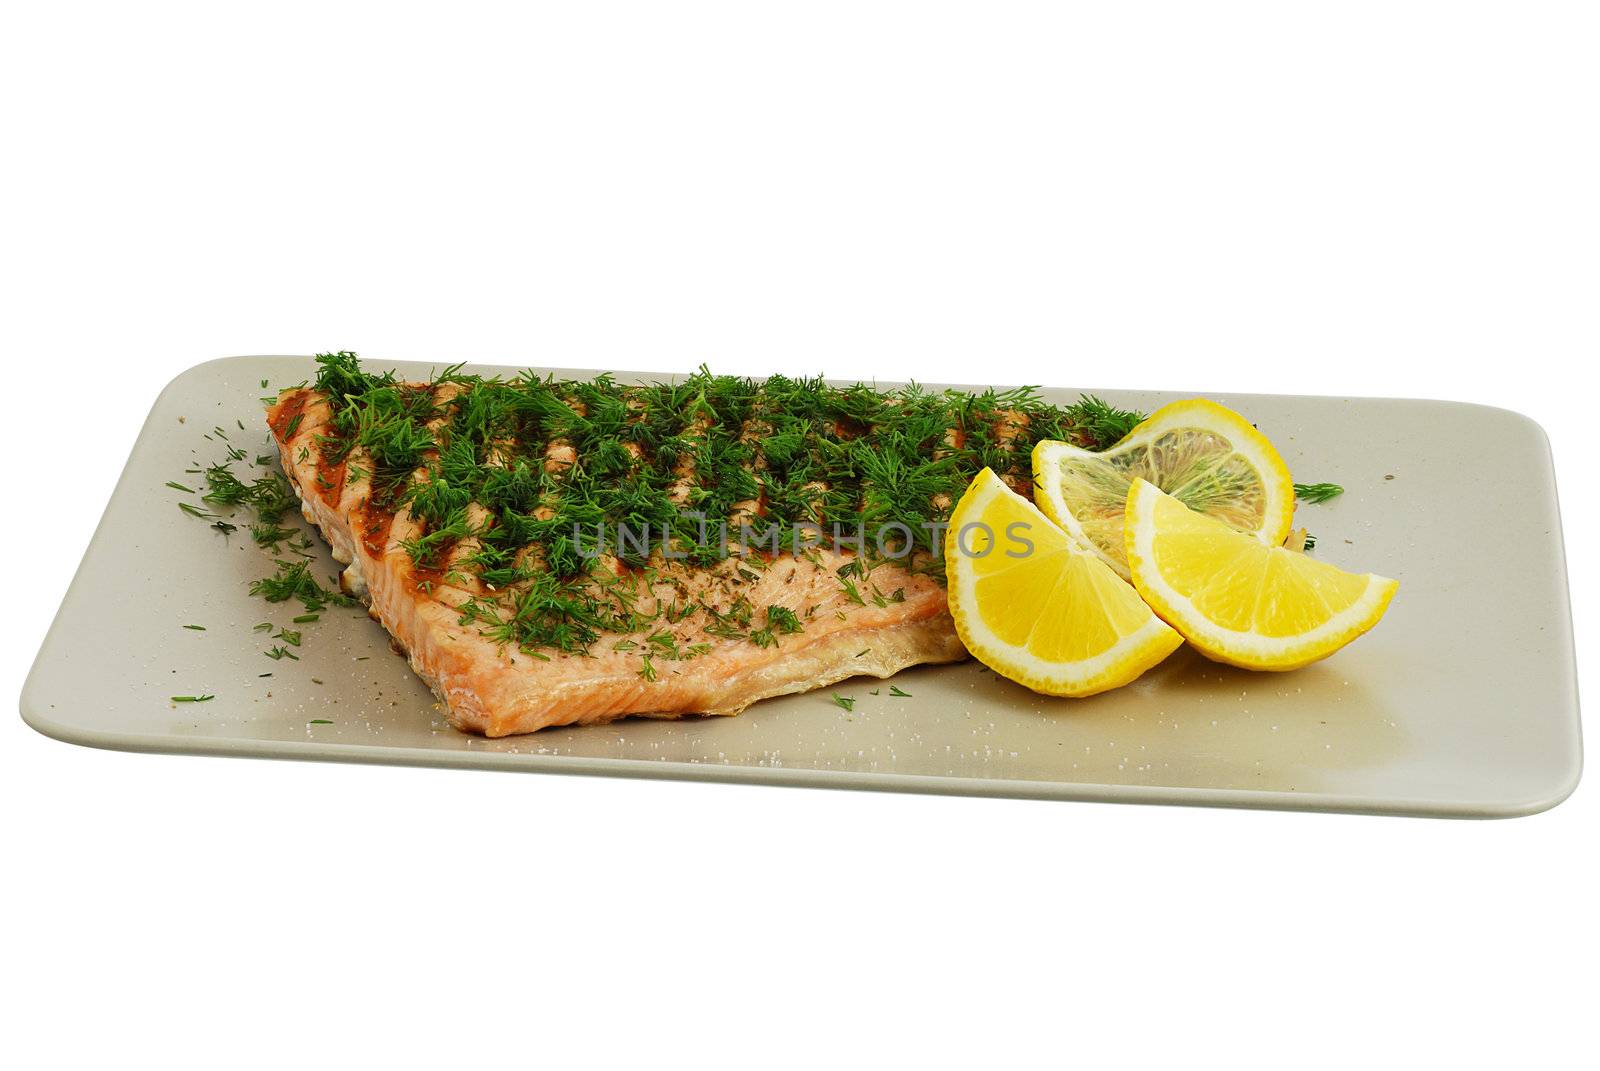 Grilled salmon fish fillet with dill and lemon on grey dish by vadidak